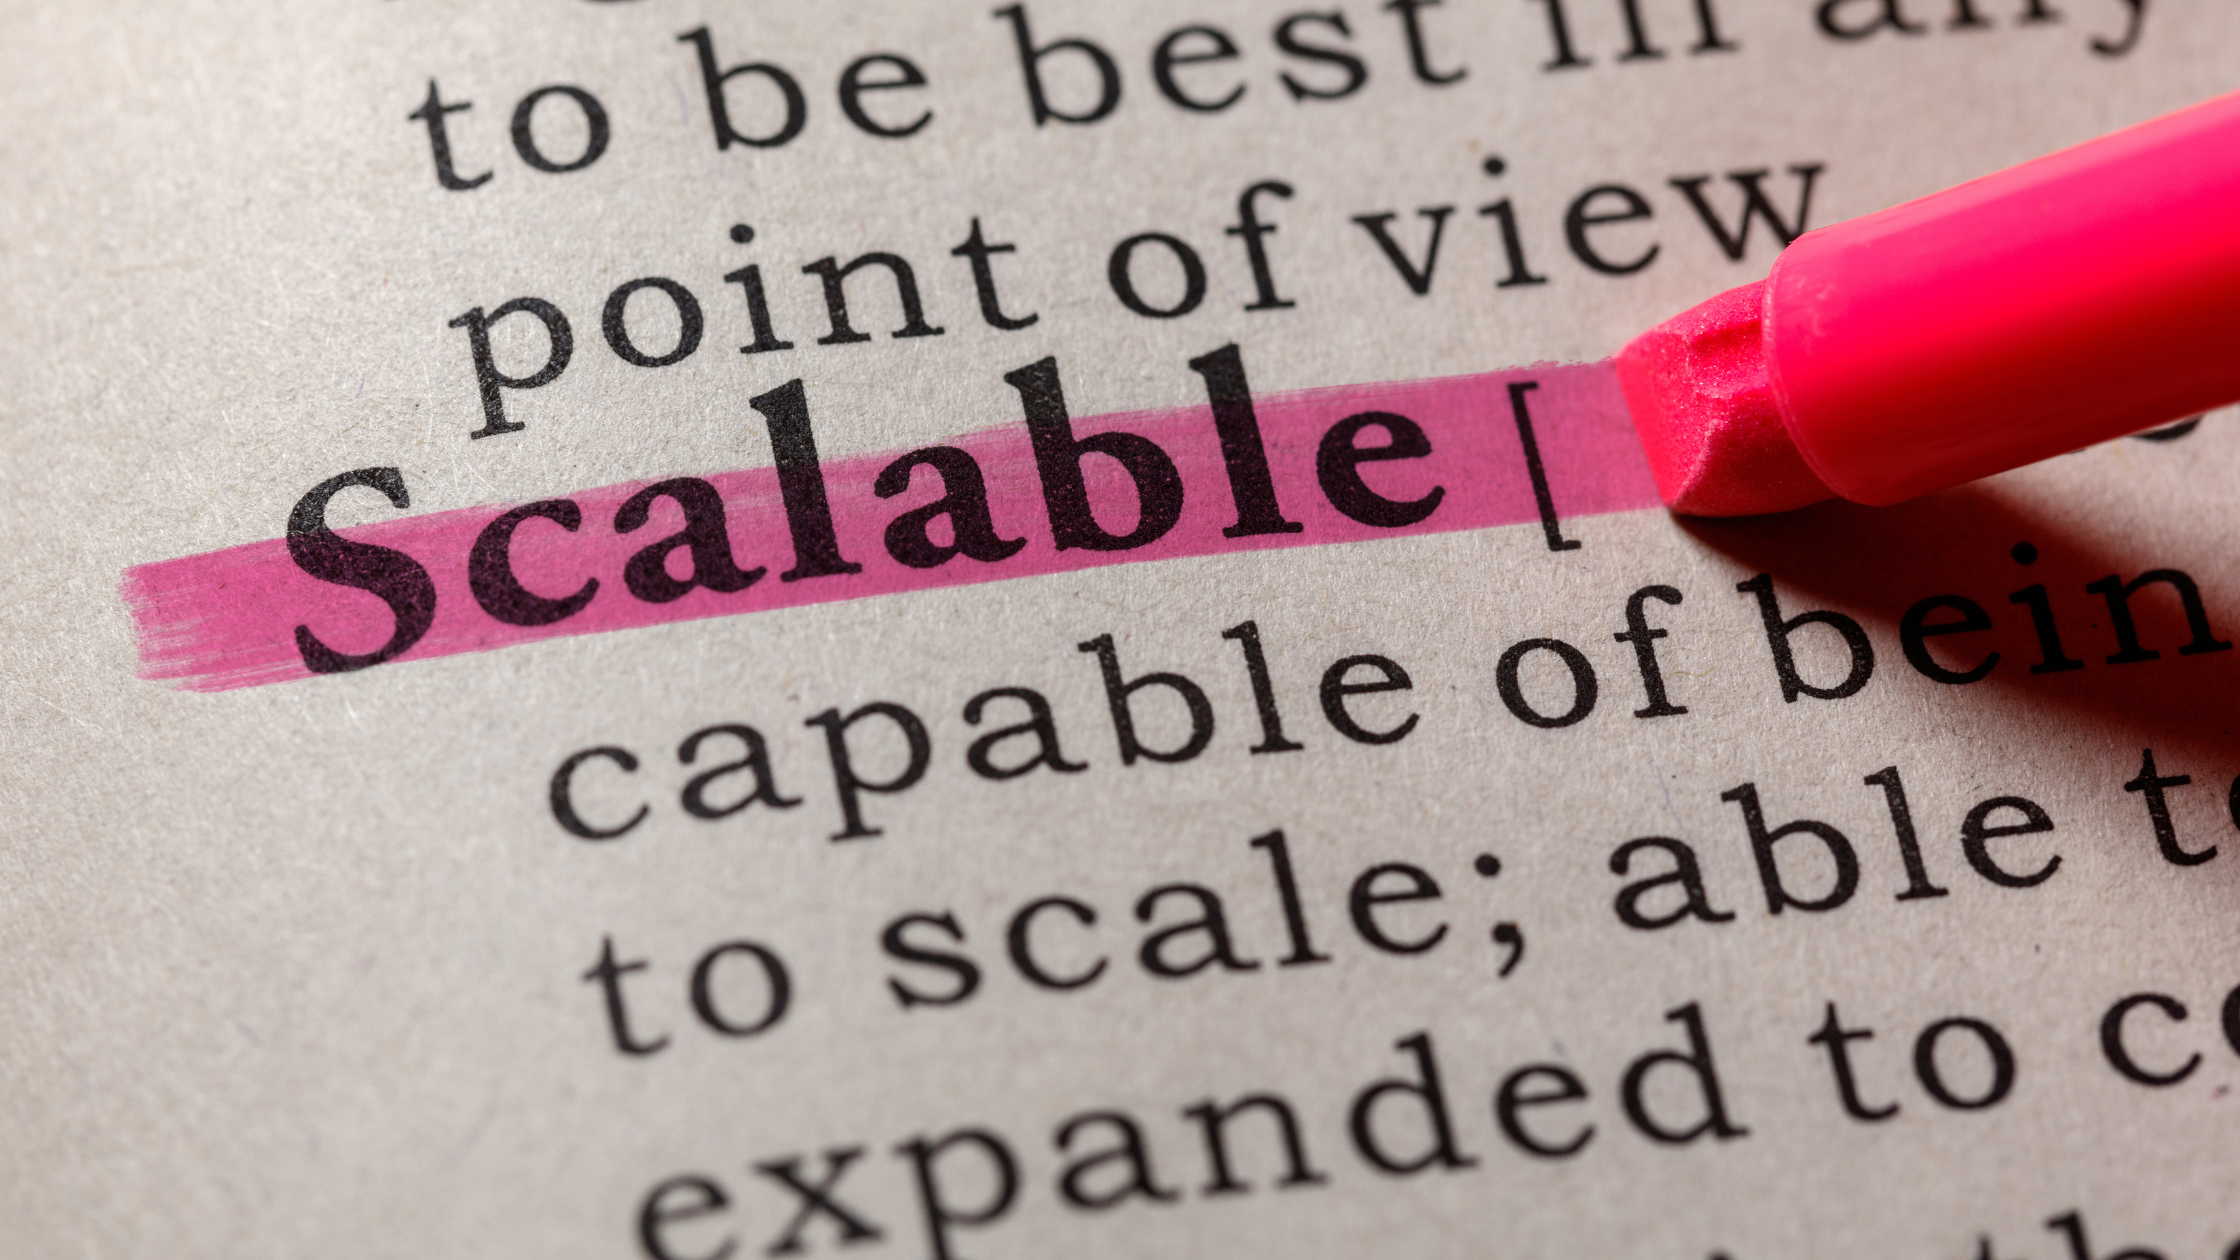 Highlighter pen highlighting word "Scalable" on a document.